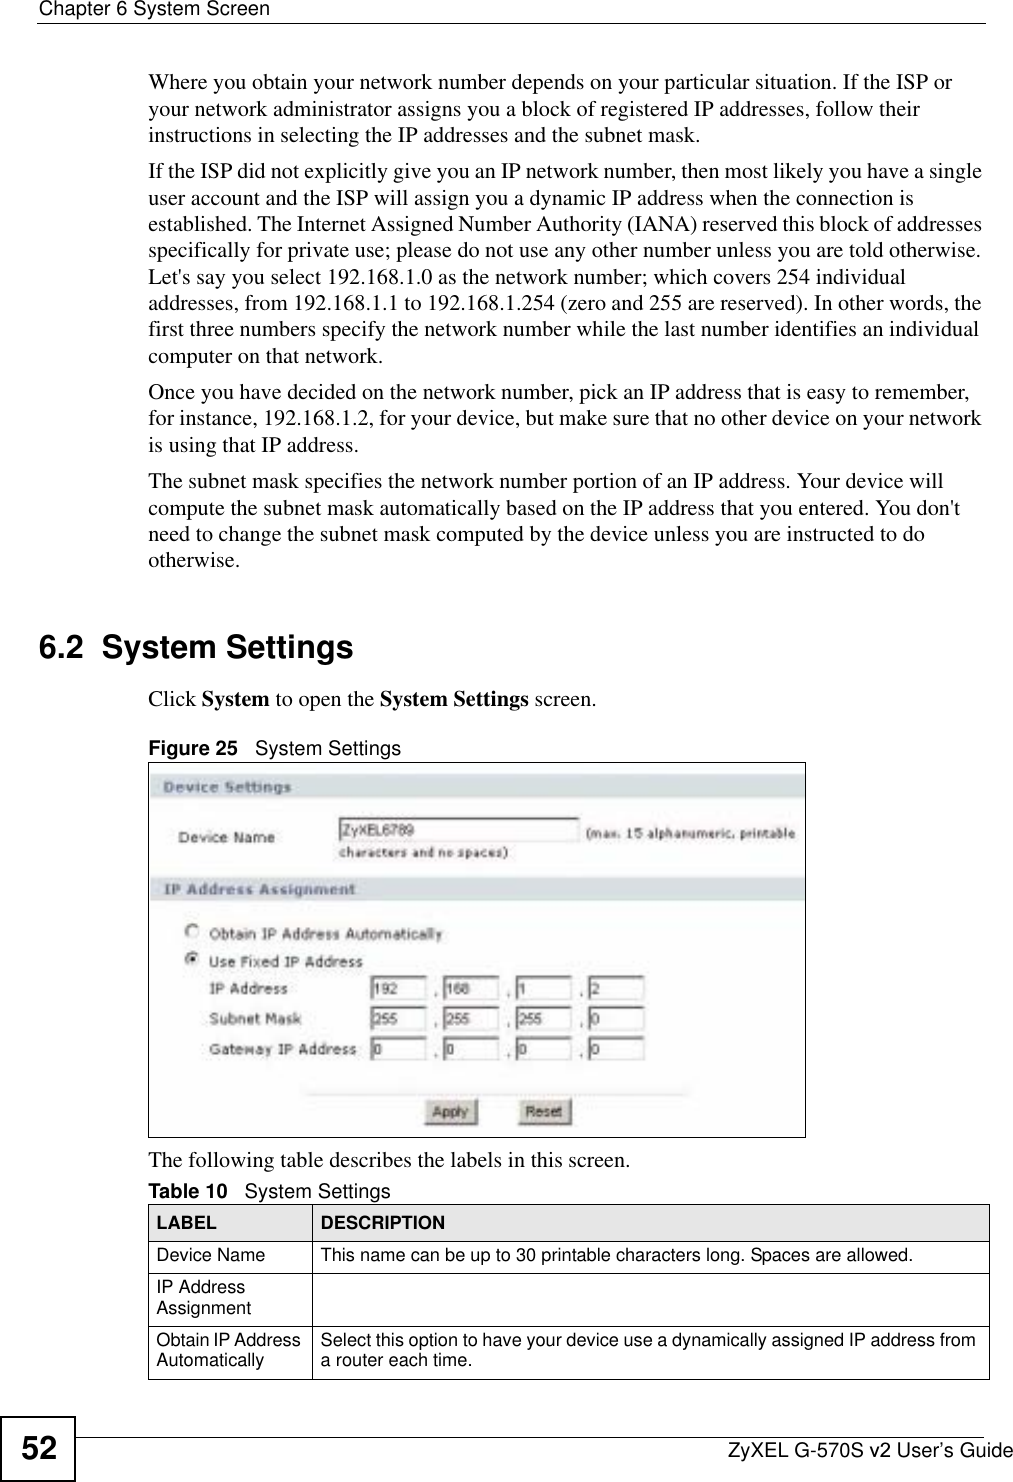 Chapter 6 System ScreenZyXEL G-570S v2 User’s Guide52Where you obtain your network number depends on your particular situation. If the ISP or your network administrator assigns you a block of registered IP addresses, follow their instructions in selecting the IP addresses and the subnet mask.If the ISP did not explicitly give you an IP network number, then most likely you have a single user account and the ISP will assign you a dynamic IP address when the connection is established. The Internet Assigned Number Authority (IANA) reserved this block of addresses specifically for private use; please do not use any other number unless you are told otherwise. Let&apos;s say you select 192.168.1.0 as the network number; which covers 254 individual addresses, from 192.168.1.1 to 192.168.1.254 (zero and 255 are reserved). In other words, the first three numbers specify the network number while the last number identifies an individual computer on that network.Once you have decided on the network number, pick an IP address that is easy to remember, for instance, 192.168.1.2, for your device, but make sure that no other device on your network is using that IP address.The subnet mask specifies the network number portion of an IP address. Your device will compute the subnet mask automatically based on the IP address that you entered. You don&apos;t need to change the subnet mask computed by the device unless you are instructed to do otherwise.6.2  System Settings Click System to open the System Settings screen.Figure 25   System SettingsThe following table describes the labels in this screen. Table 10   System SettingsLABEL DESCRIPTIONDevice Name This name can be up to 30 printable characters long. Spaces are allowed.IP Address AssignmentObtain IP Address Automatically Select this option to have your device use a dynamically assigned IP address from a router each time.